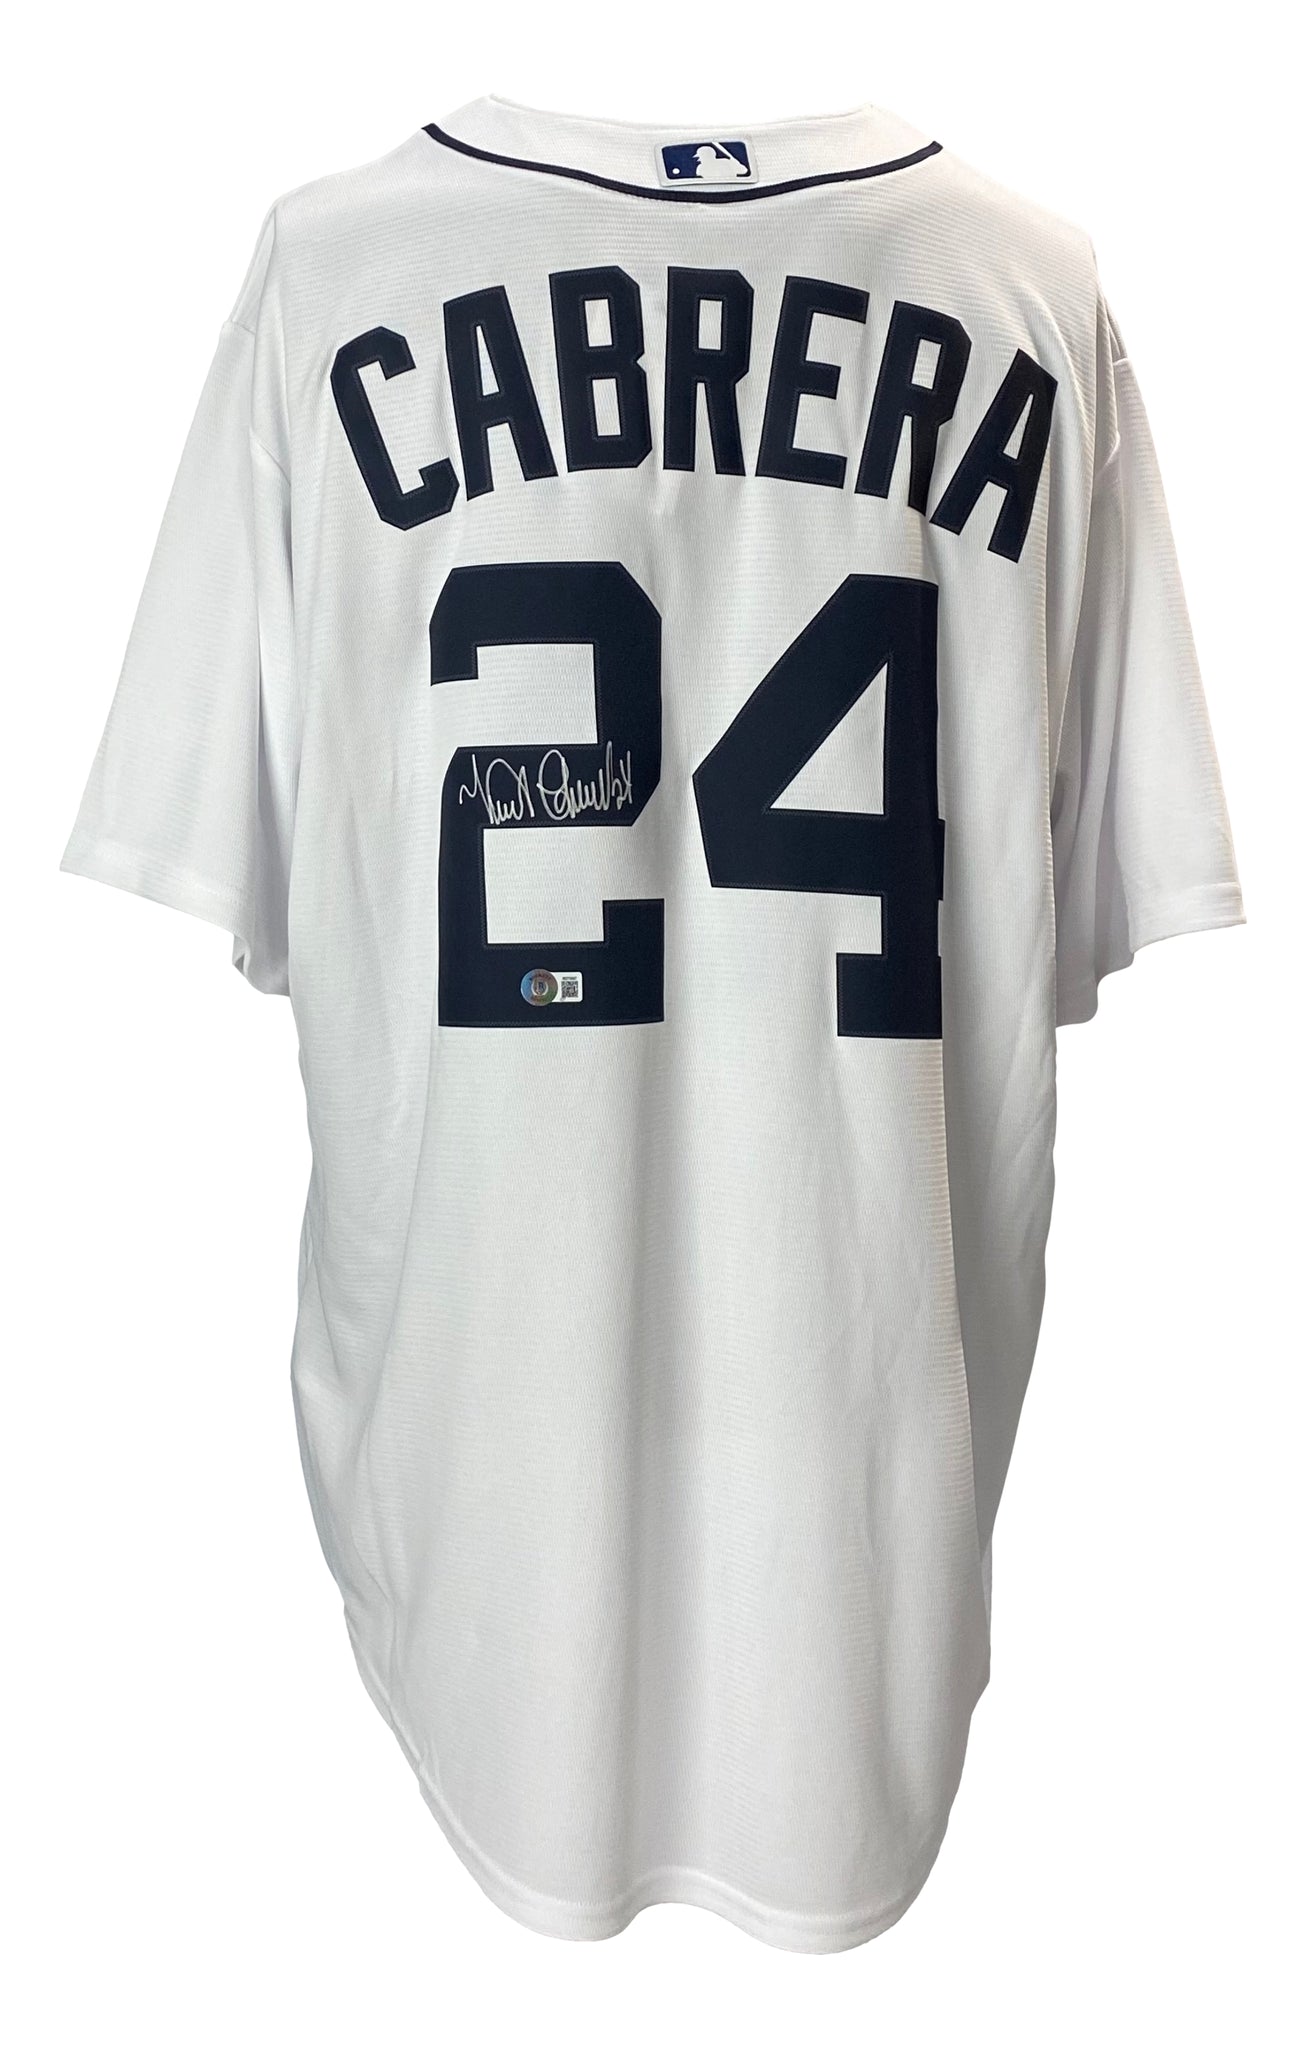 Miguel Cabrera Signed Detroit Tigers White Nike Baseball Jersey BAS IT